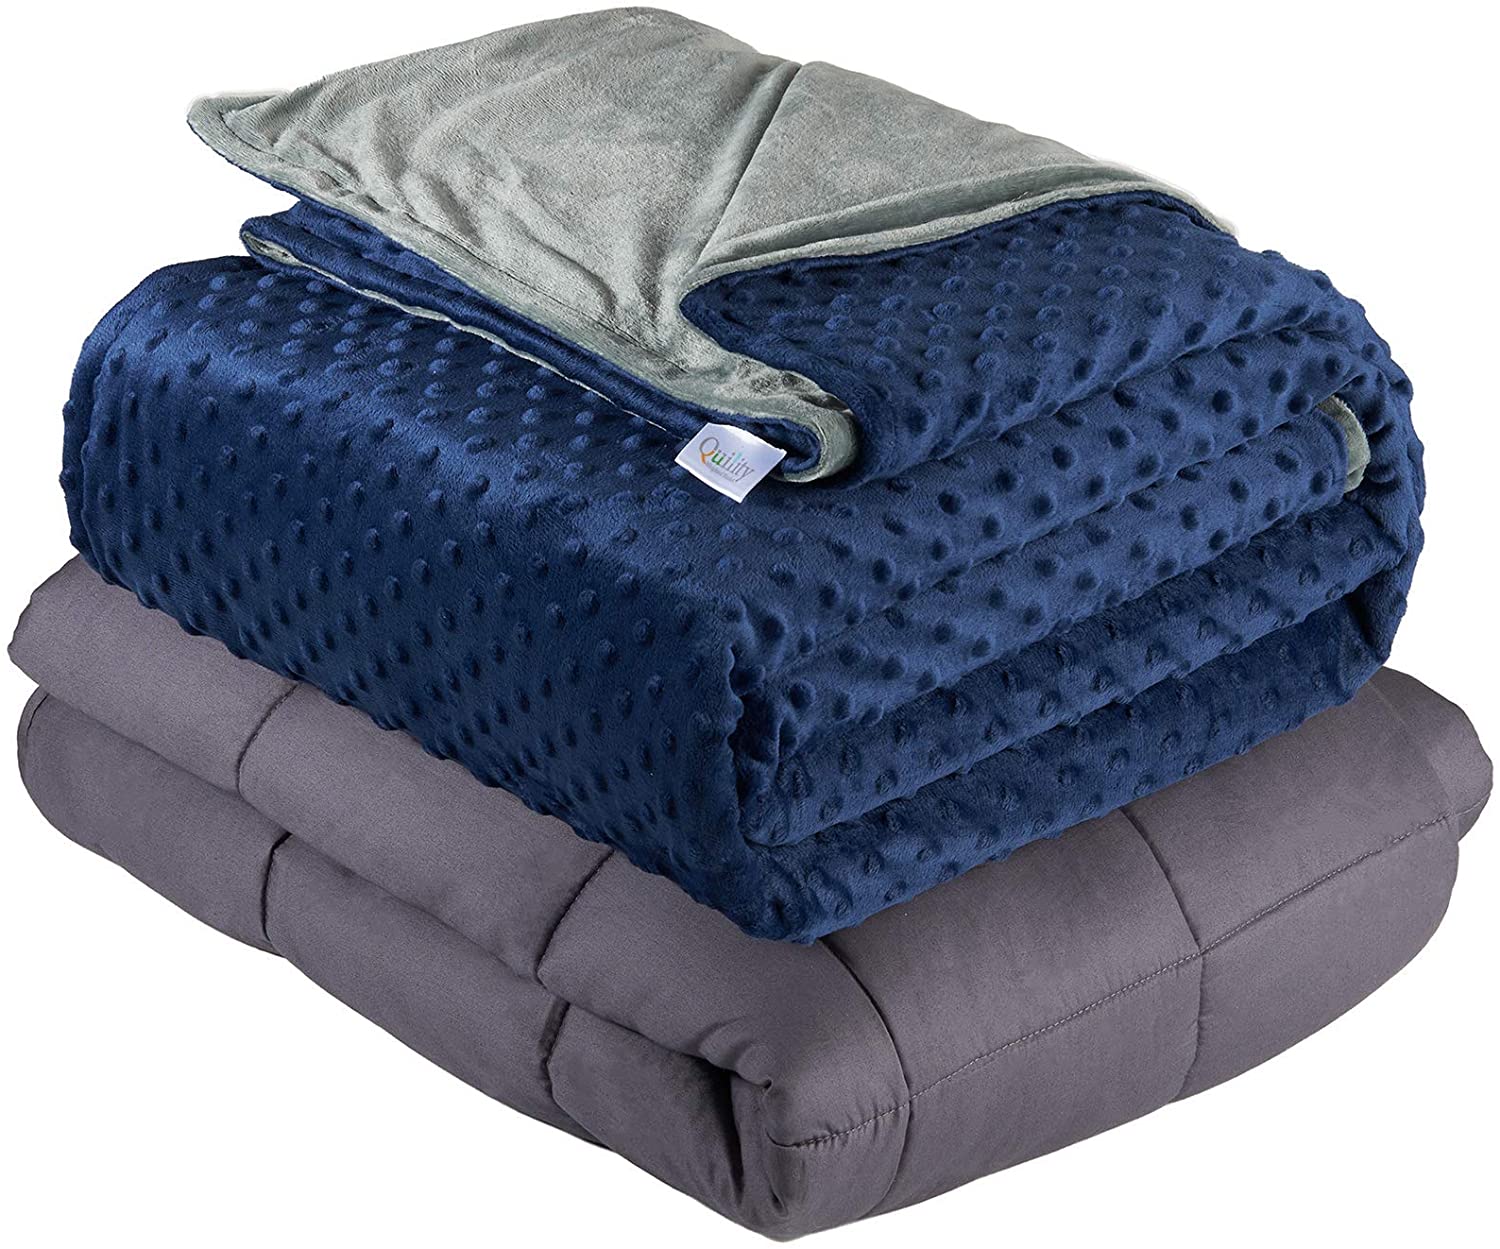 Quility 15-Pound Weighted Blanket & Removable Cover